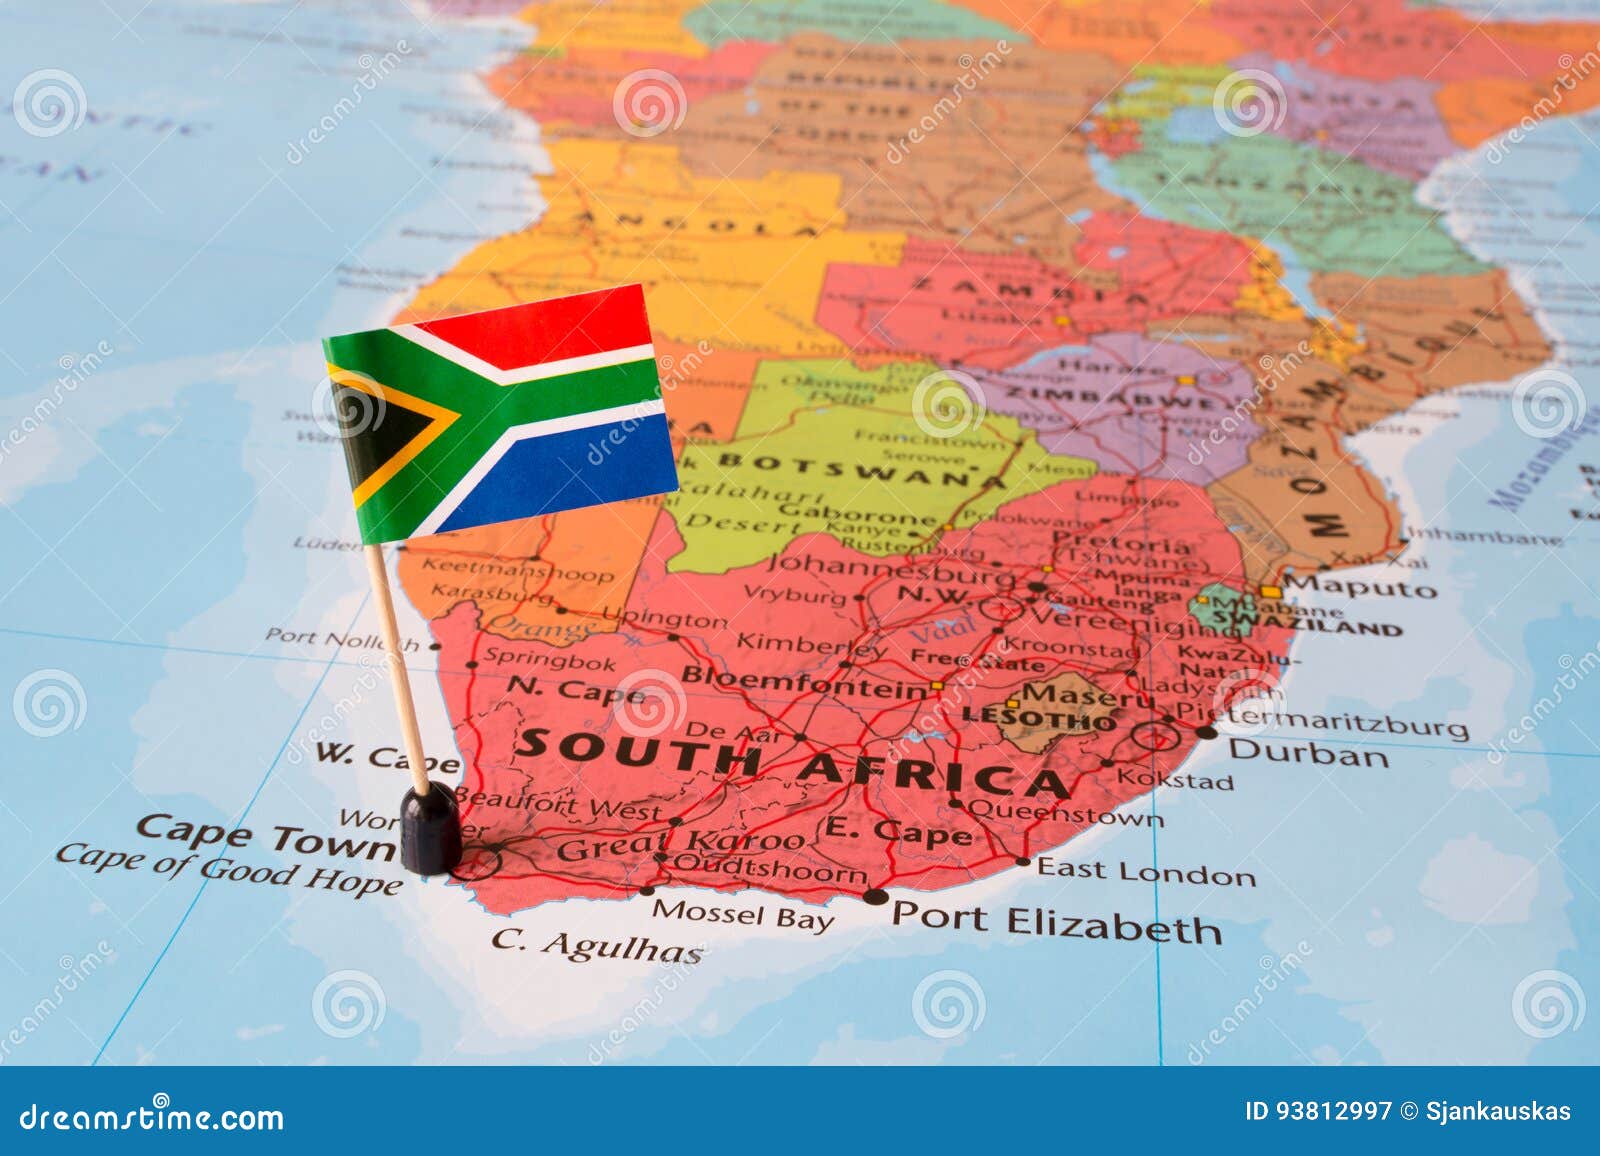 south africa map and flag pin